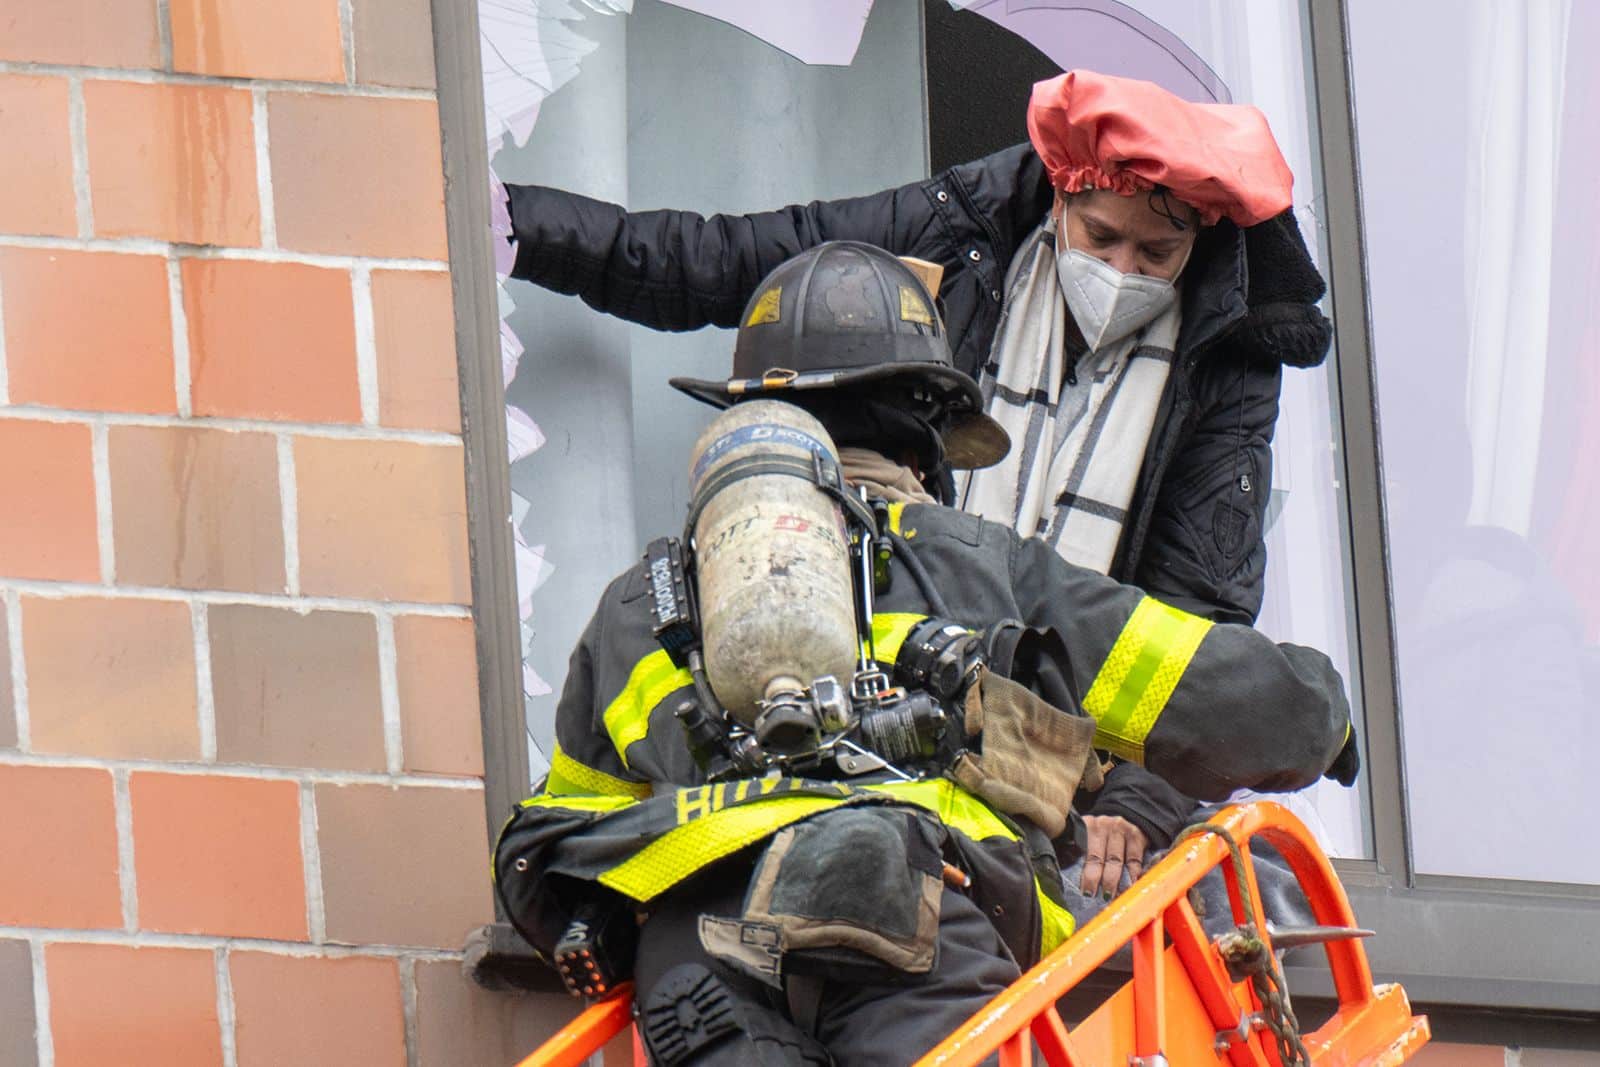 A firefighter helps a victim climb out a broken window to evacuate the building. Theodore Parisienne/New York Daily News/Getty Images